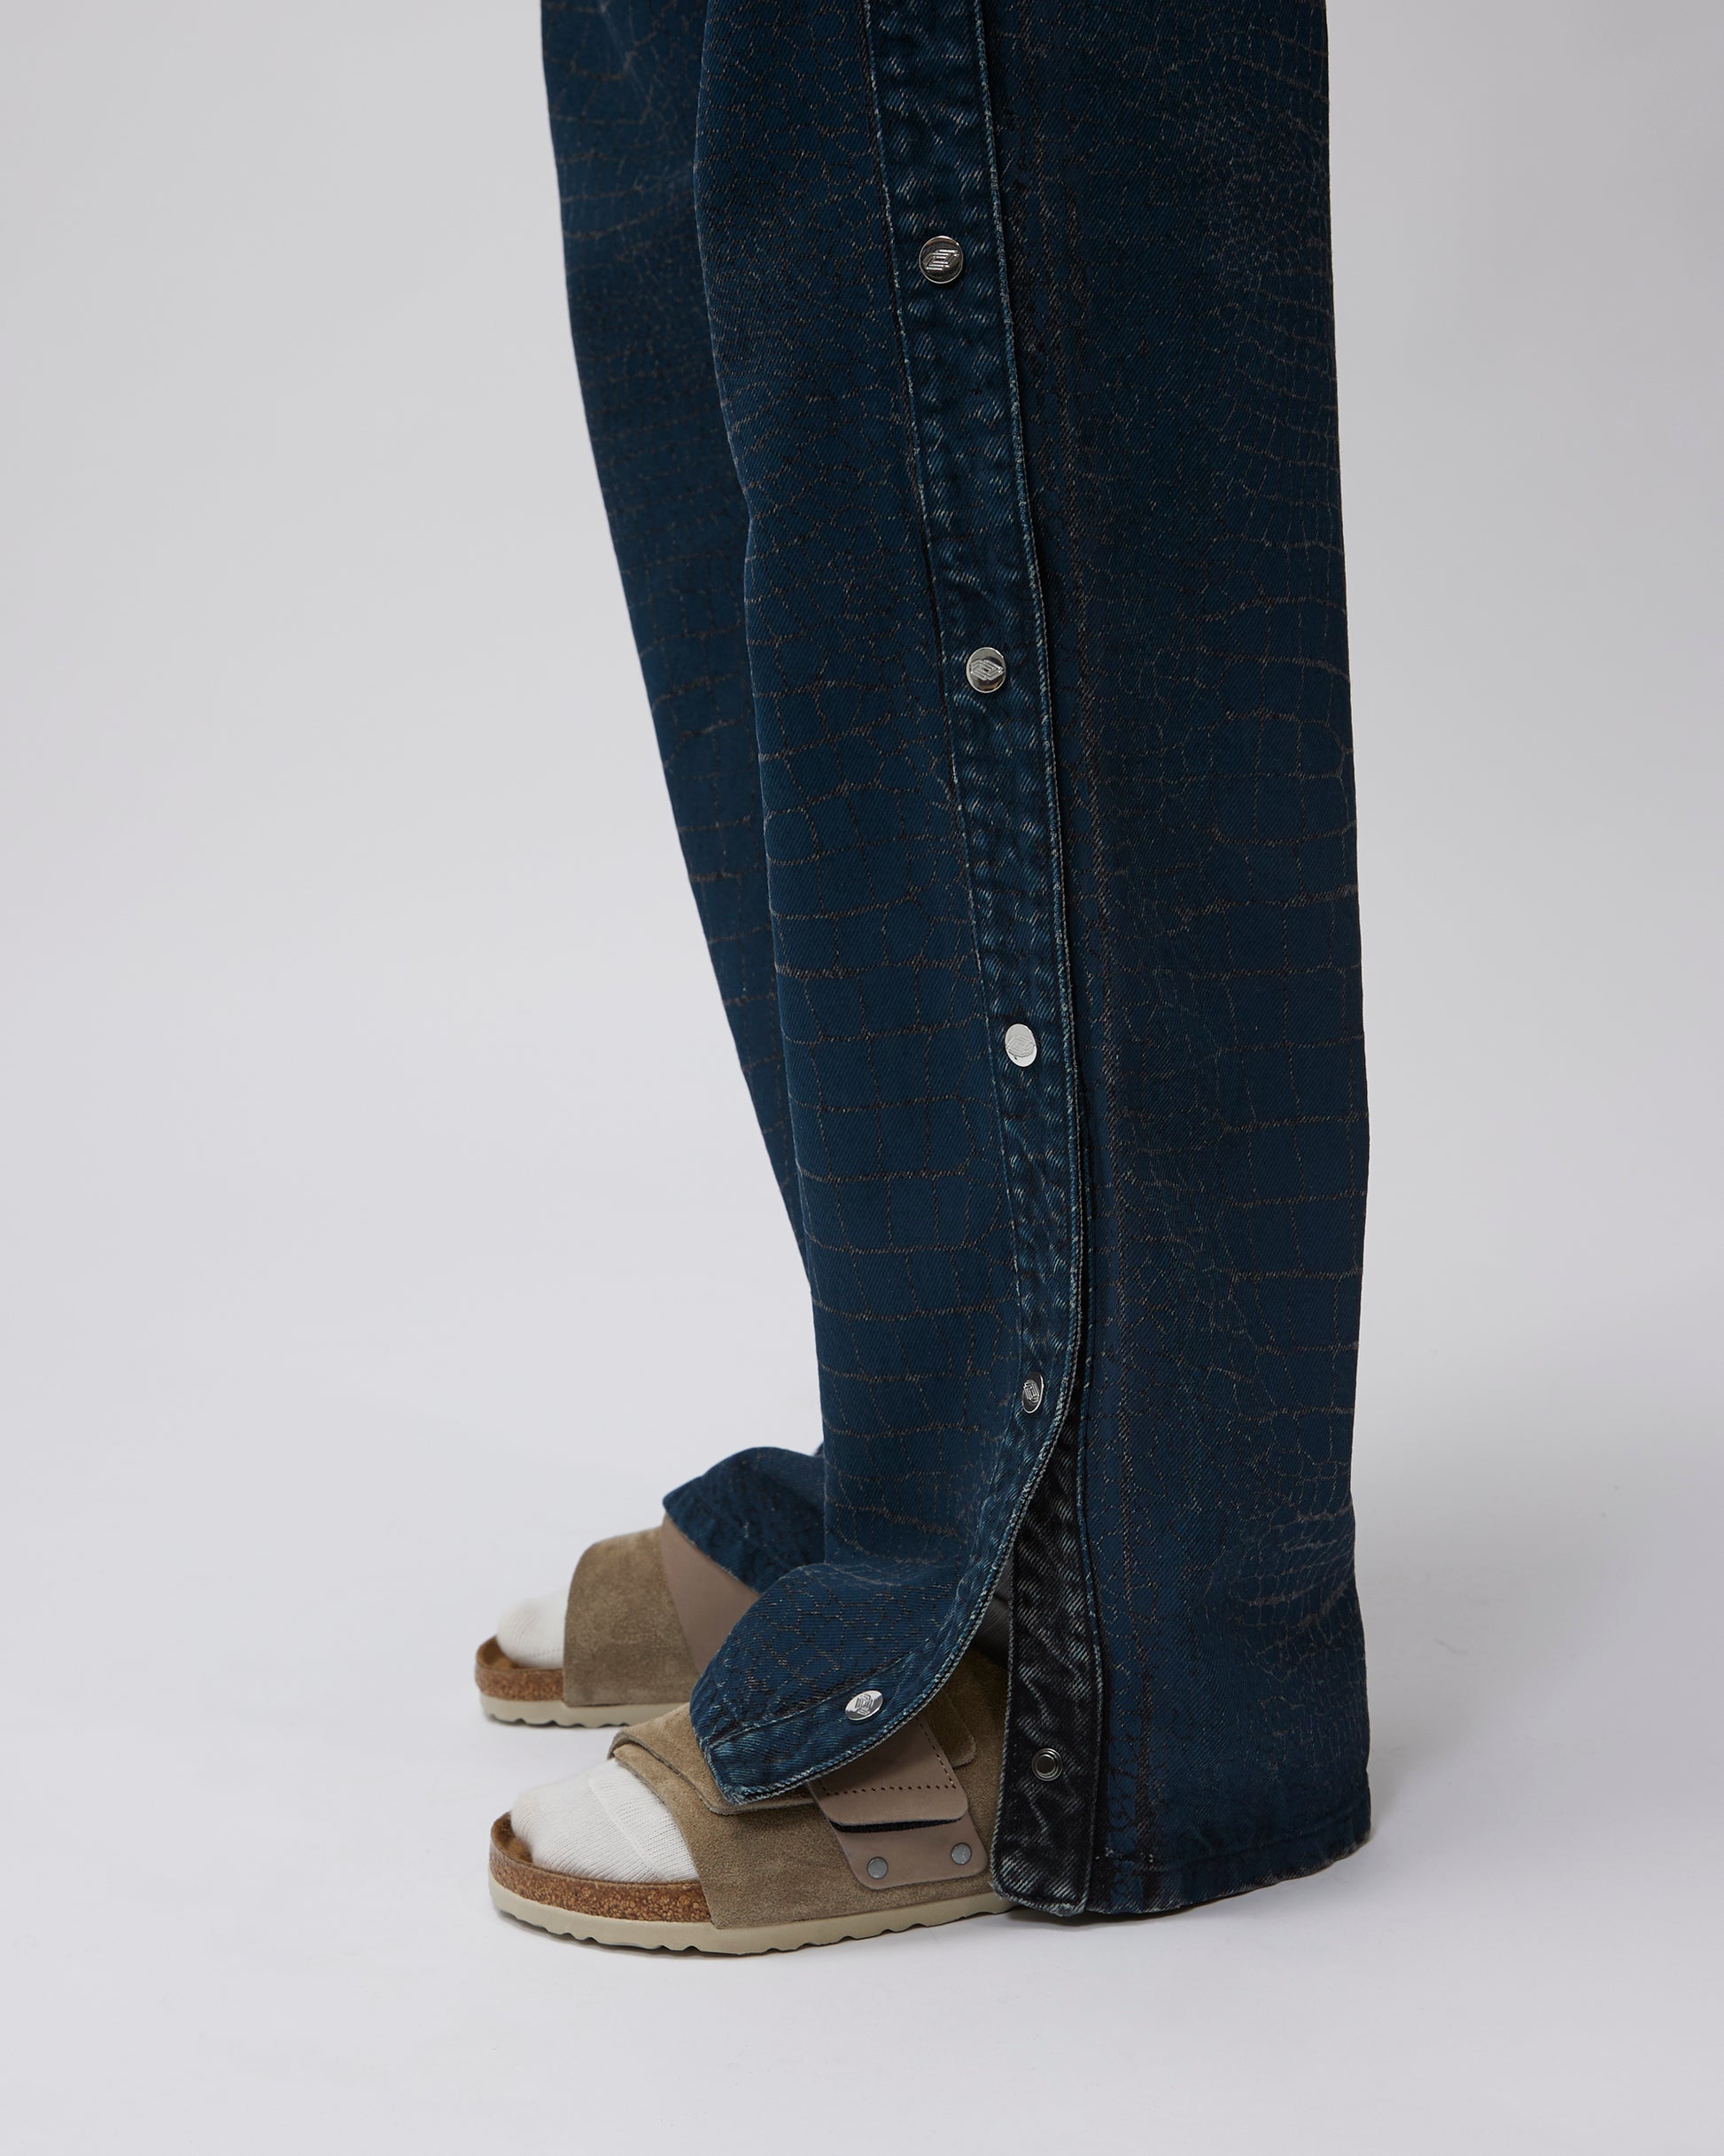 CROC PRINT JEAN WITH SIDE SNAPS - DISPATCH DATE BEGINNING JANUARY - Due Diligence Apparel